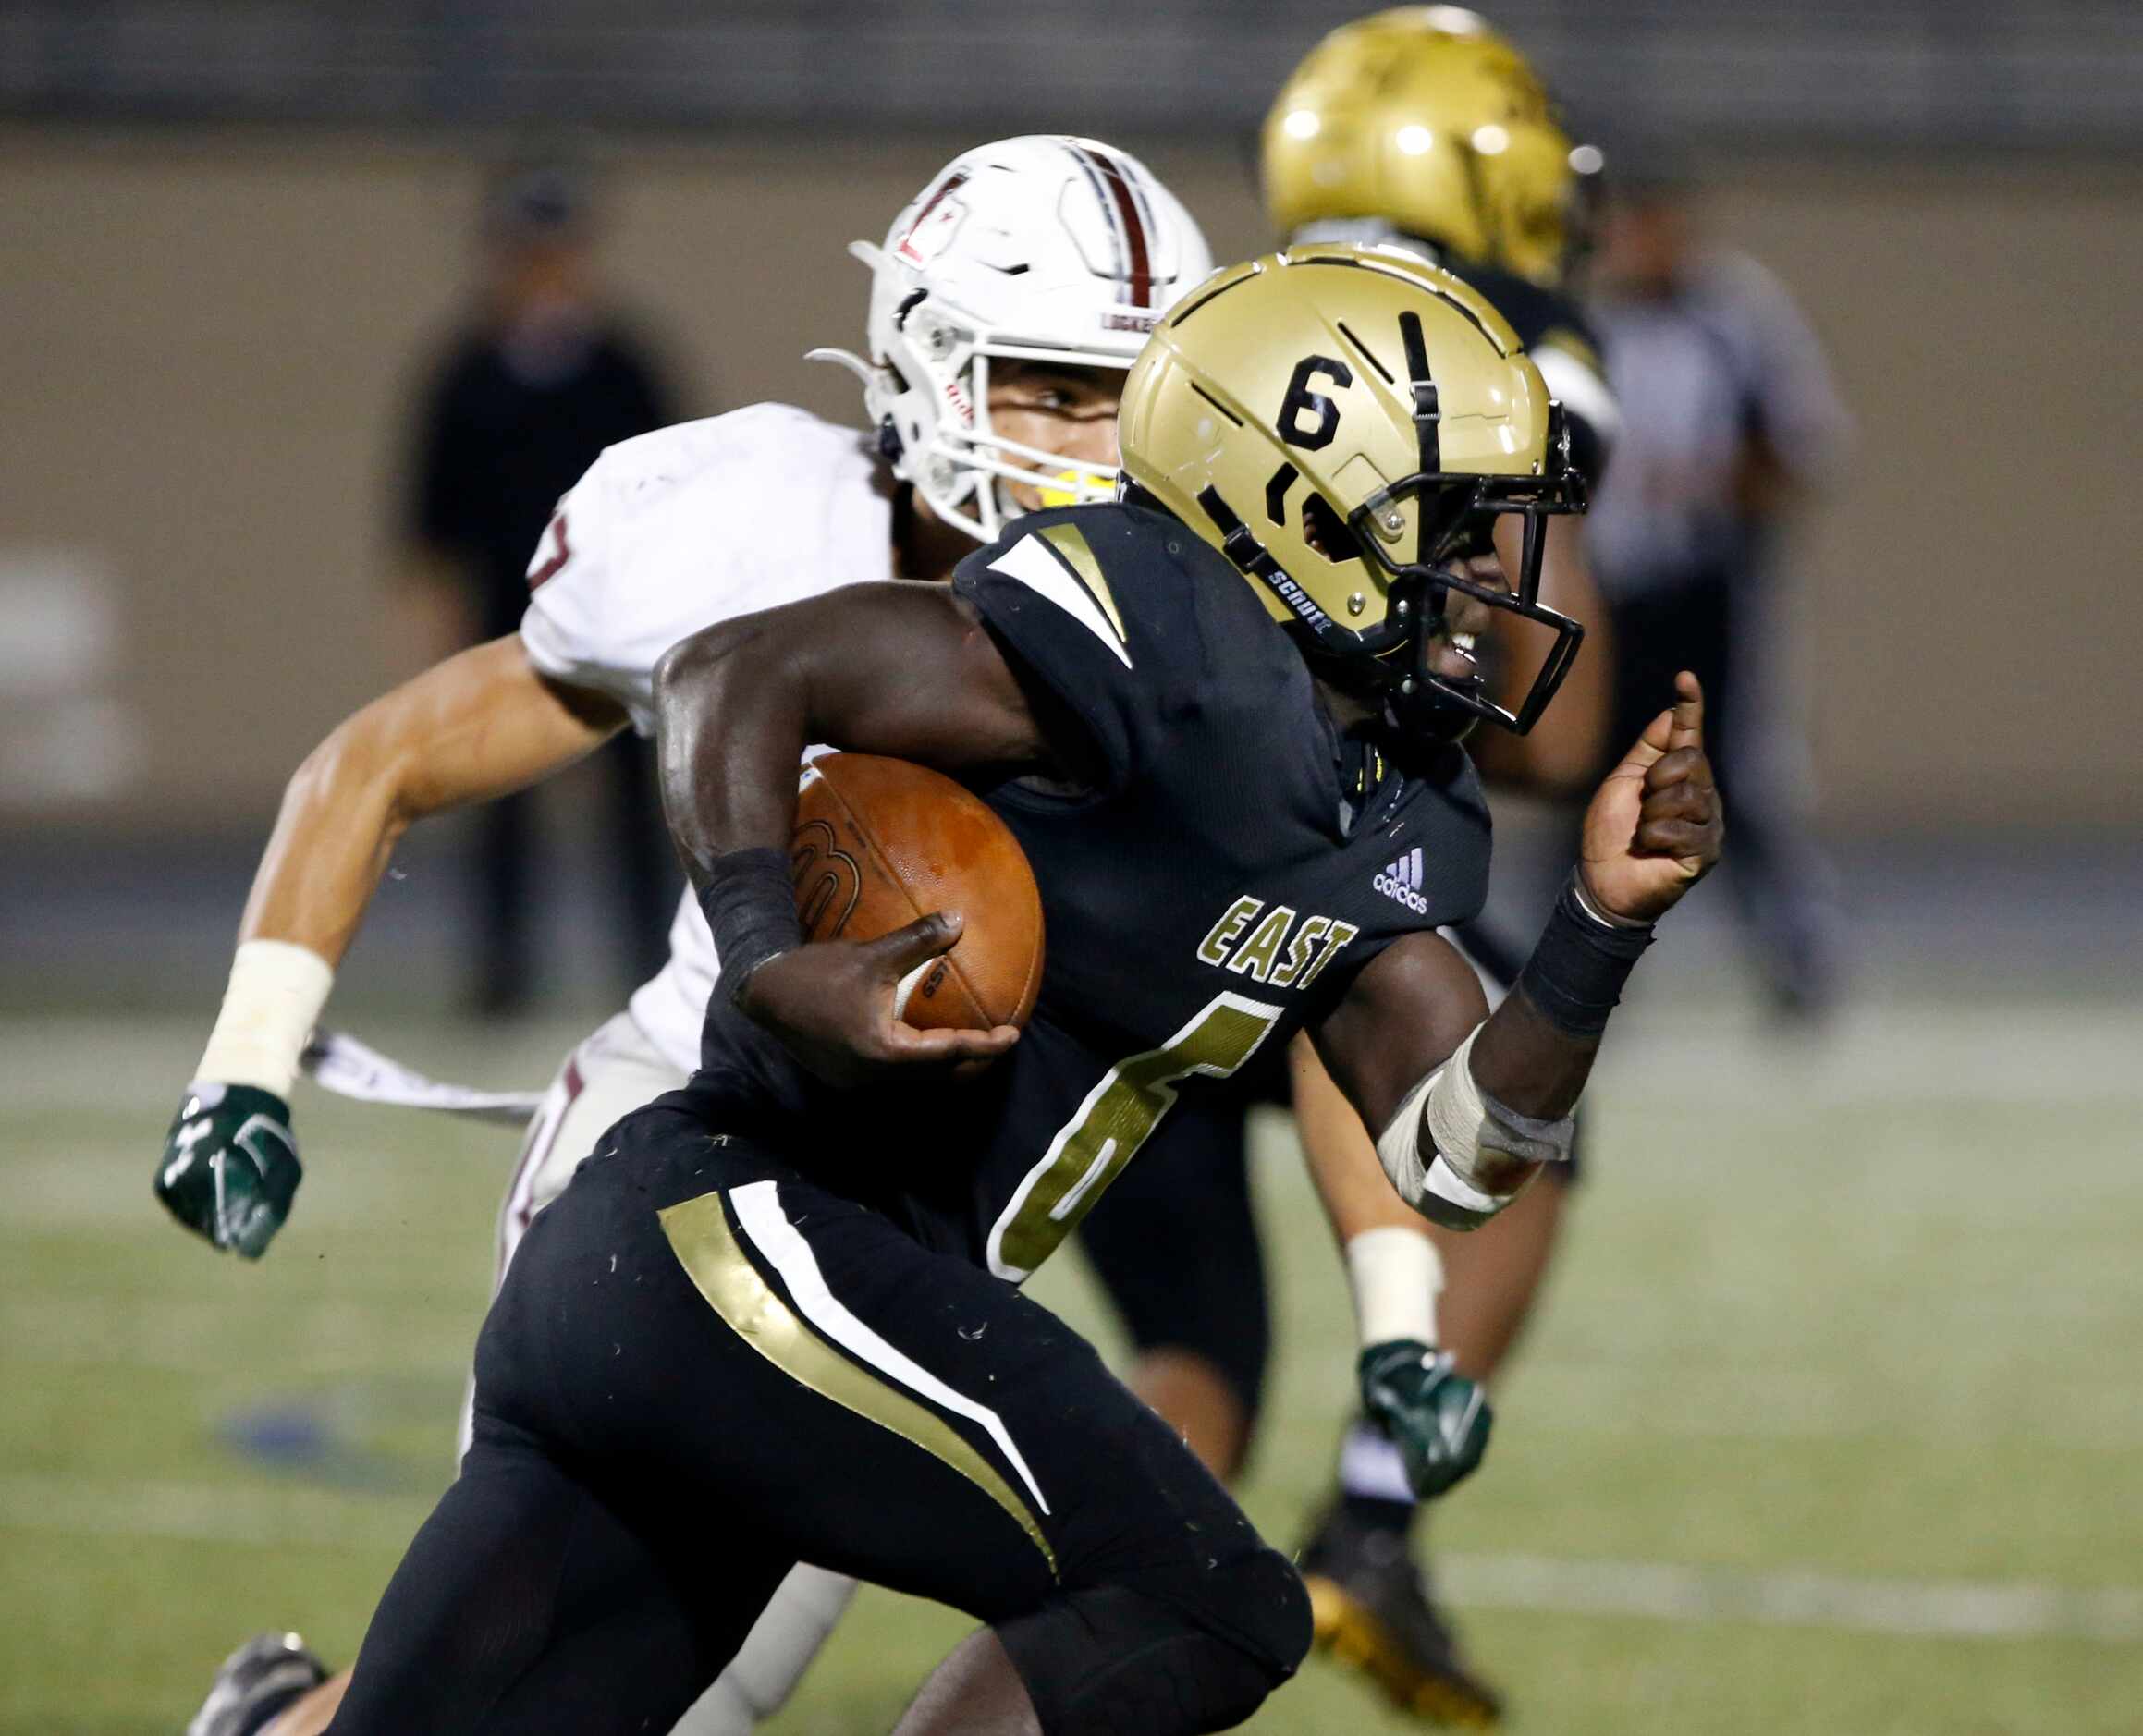 Plano East High’s Ismail Mahdi (6) sweeps right end in route to a touchdown during the first...